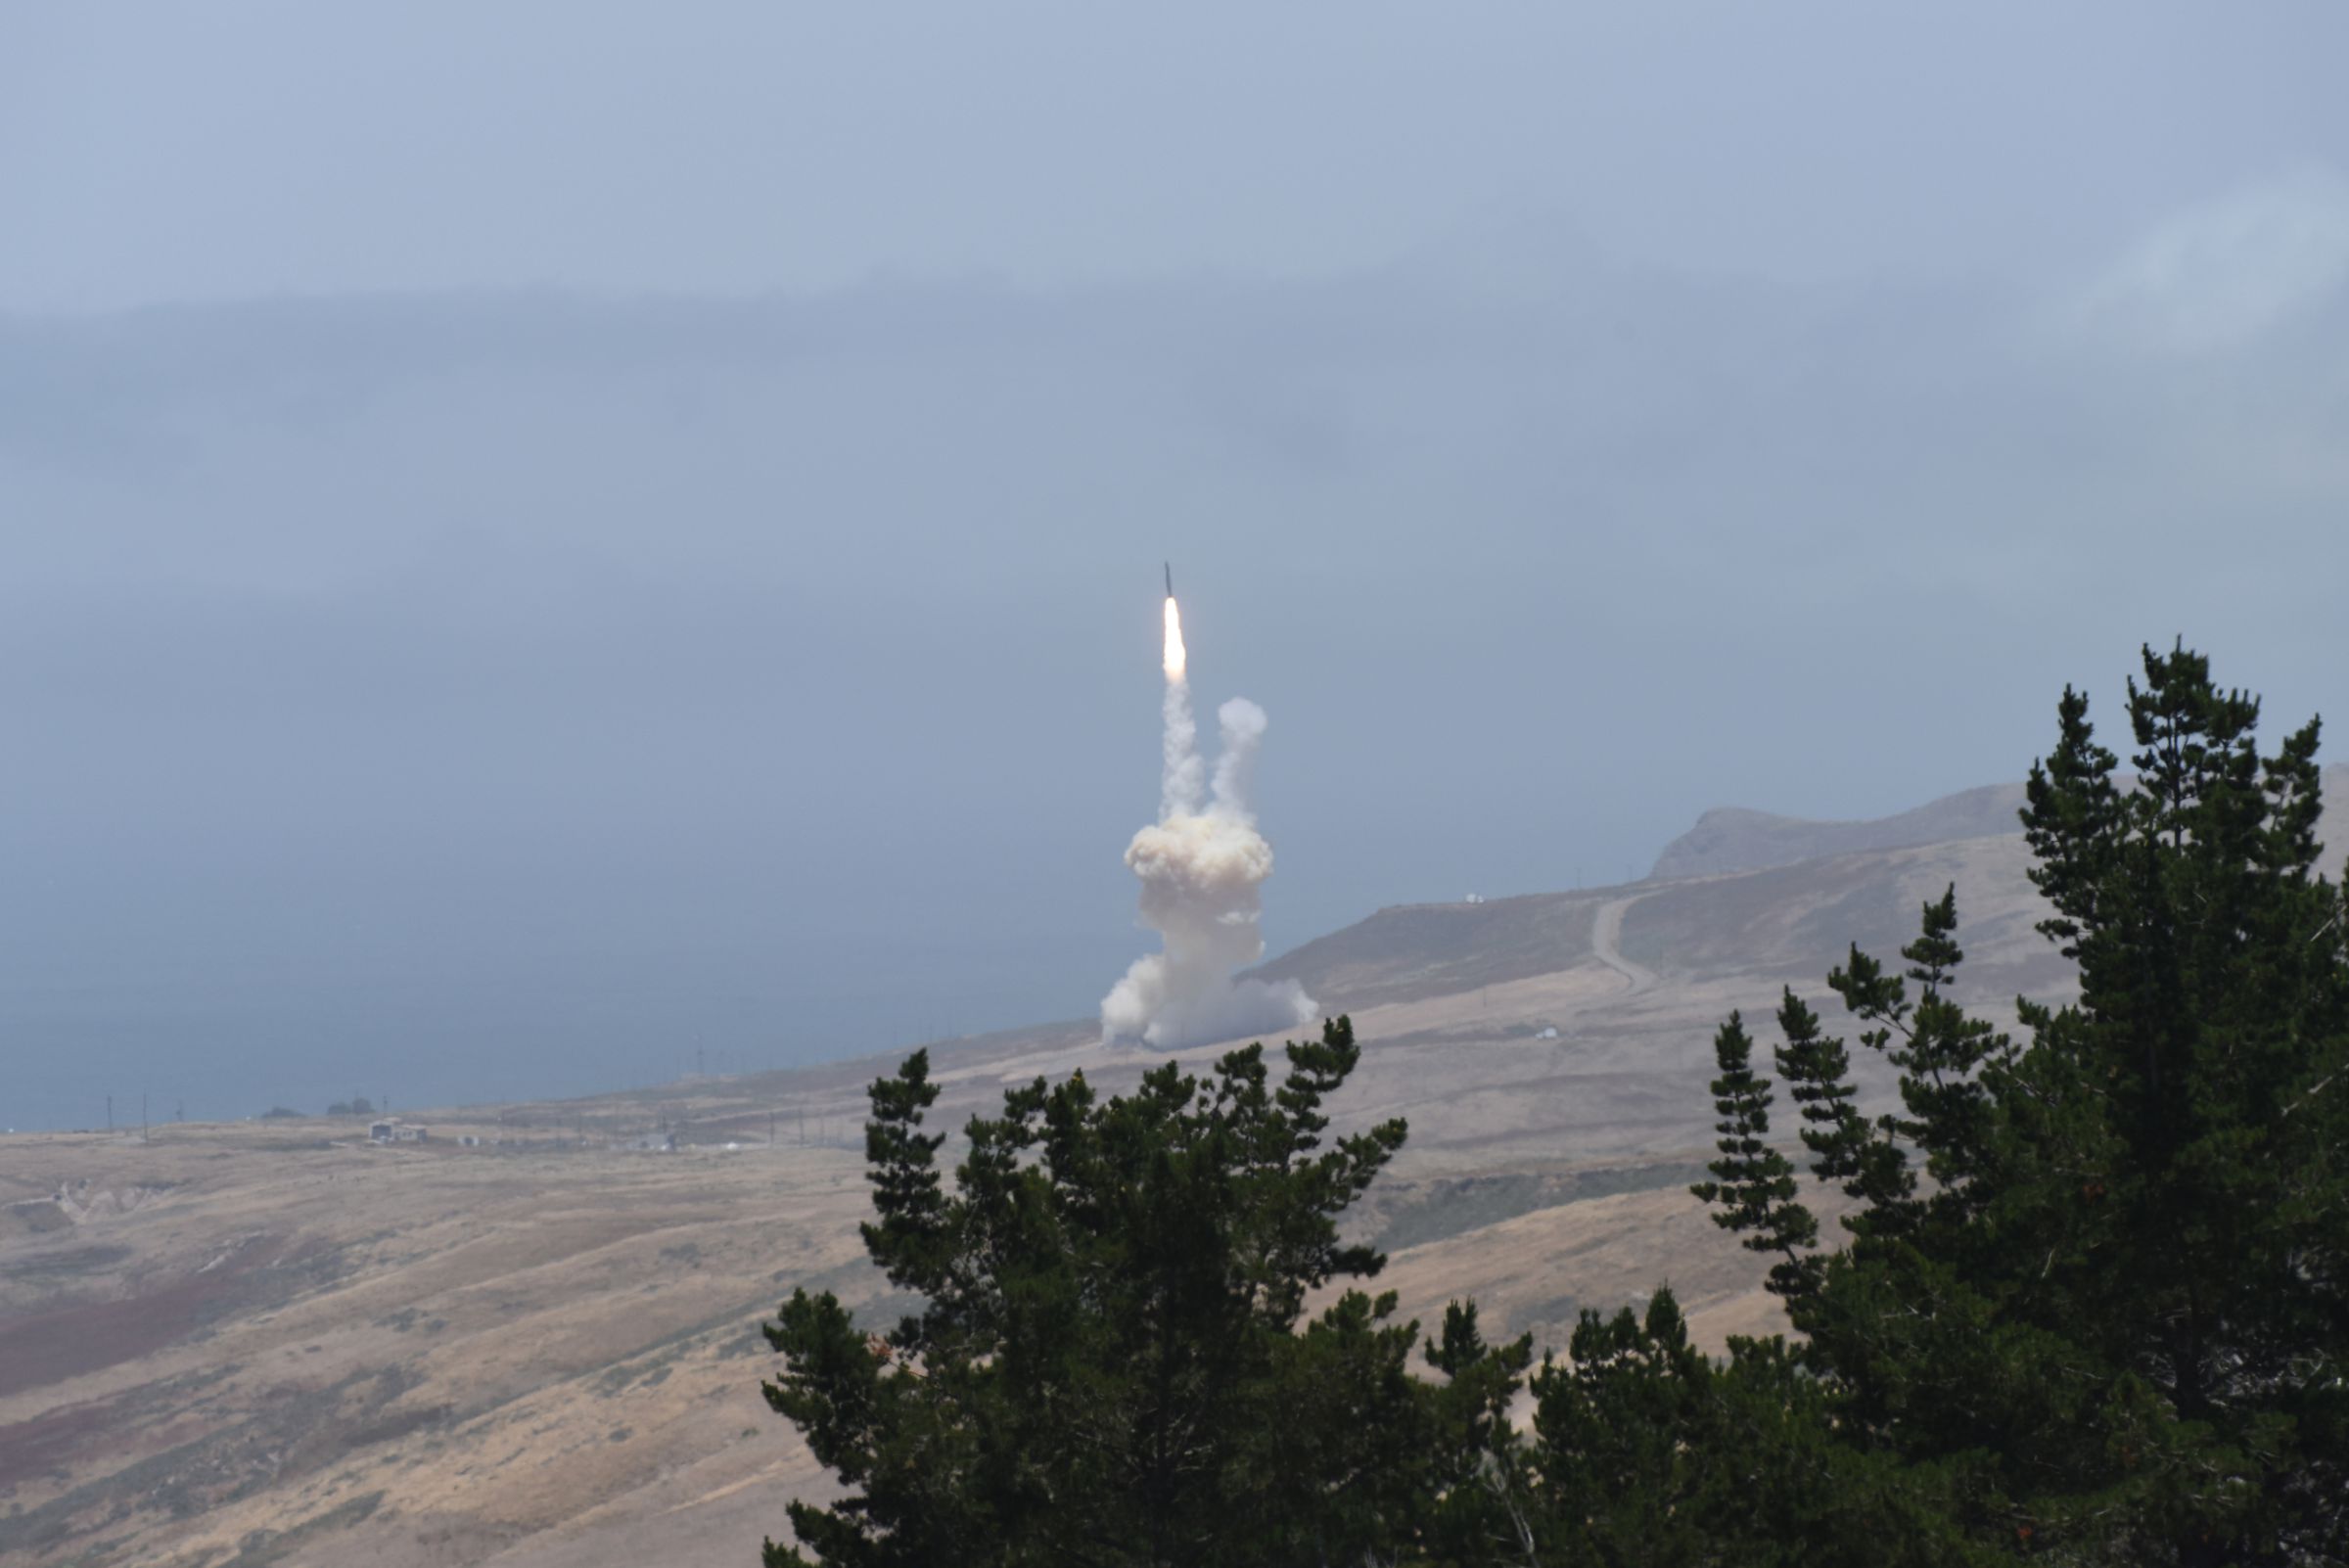 An interceptor launched from Vandenberg Air Force Base in California in 2017, which successfully collided with a launched target